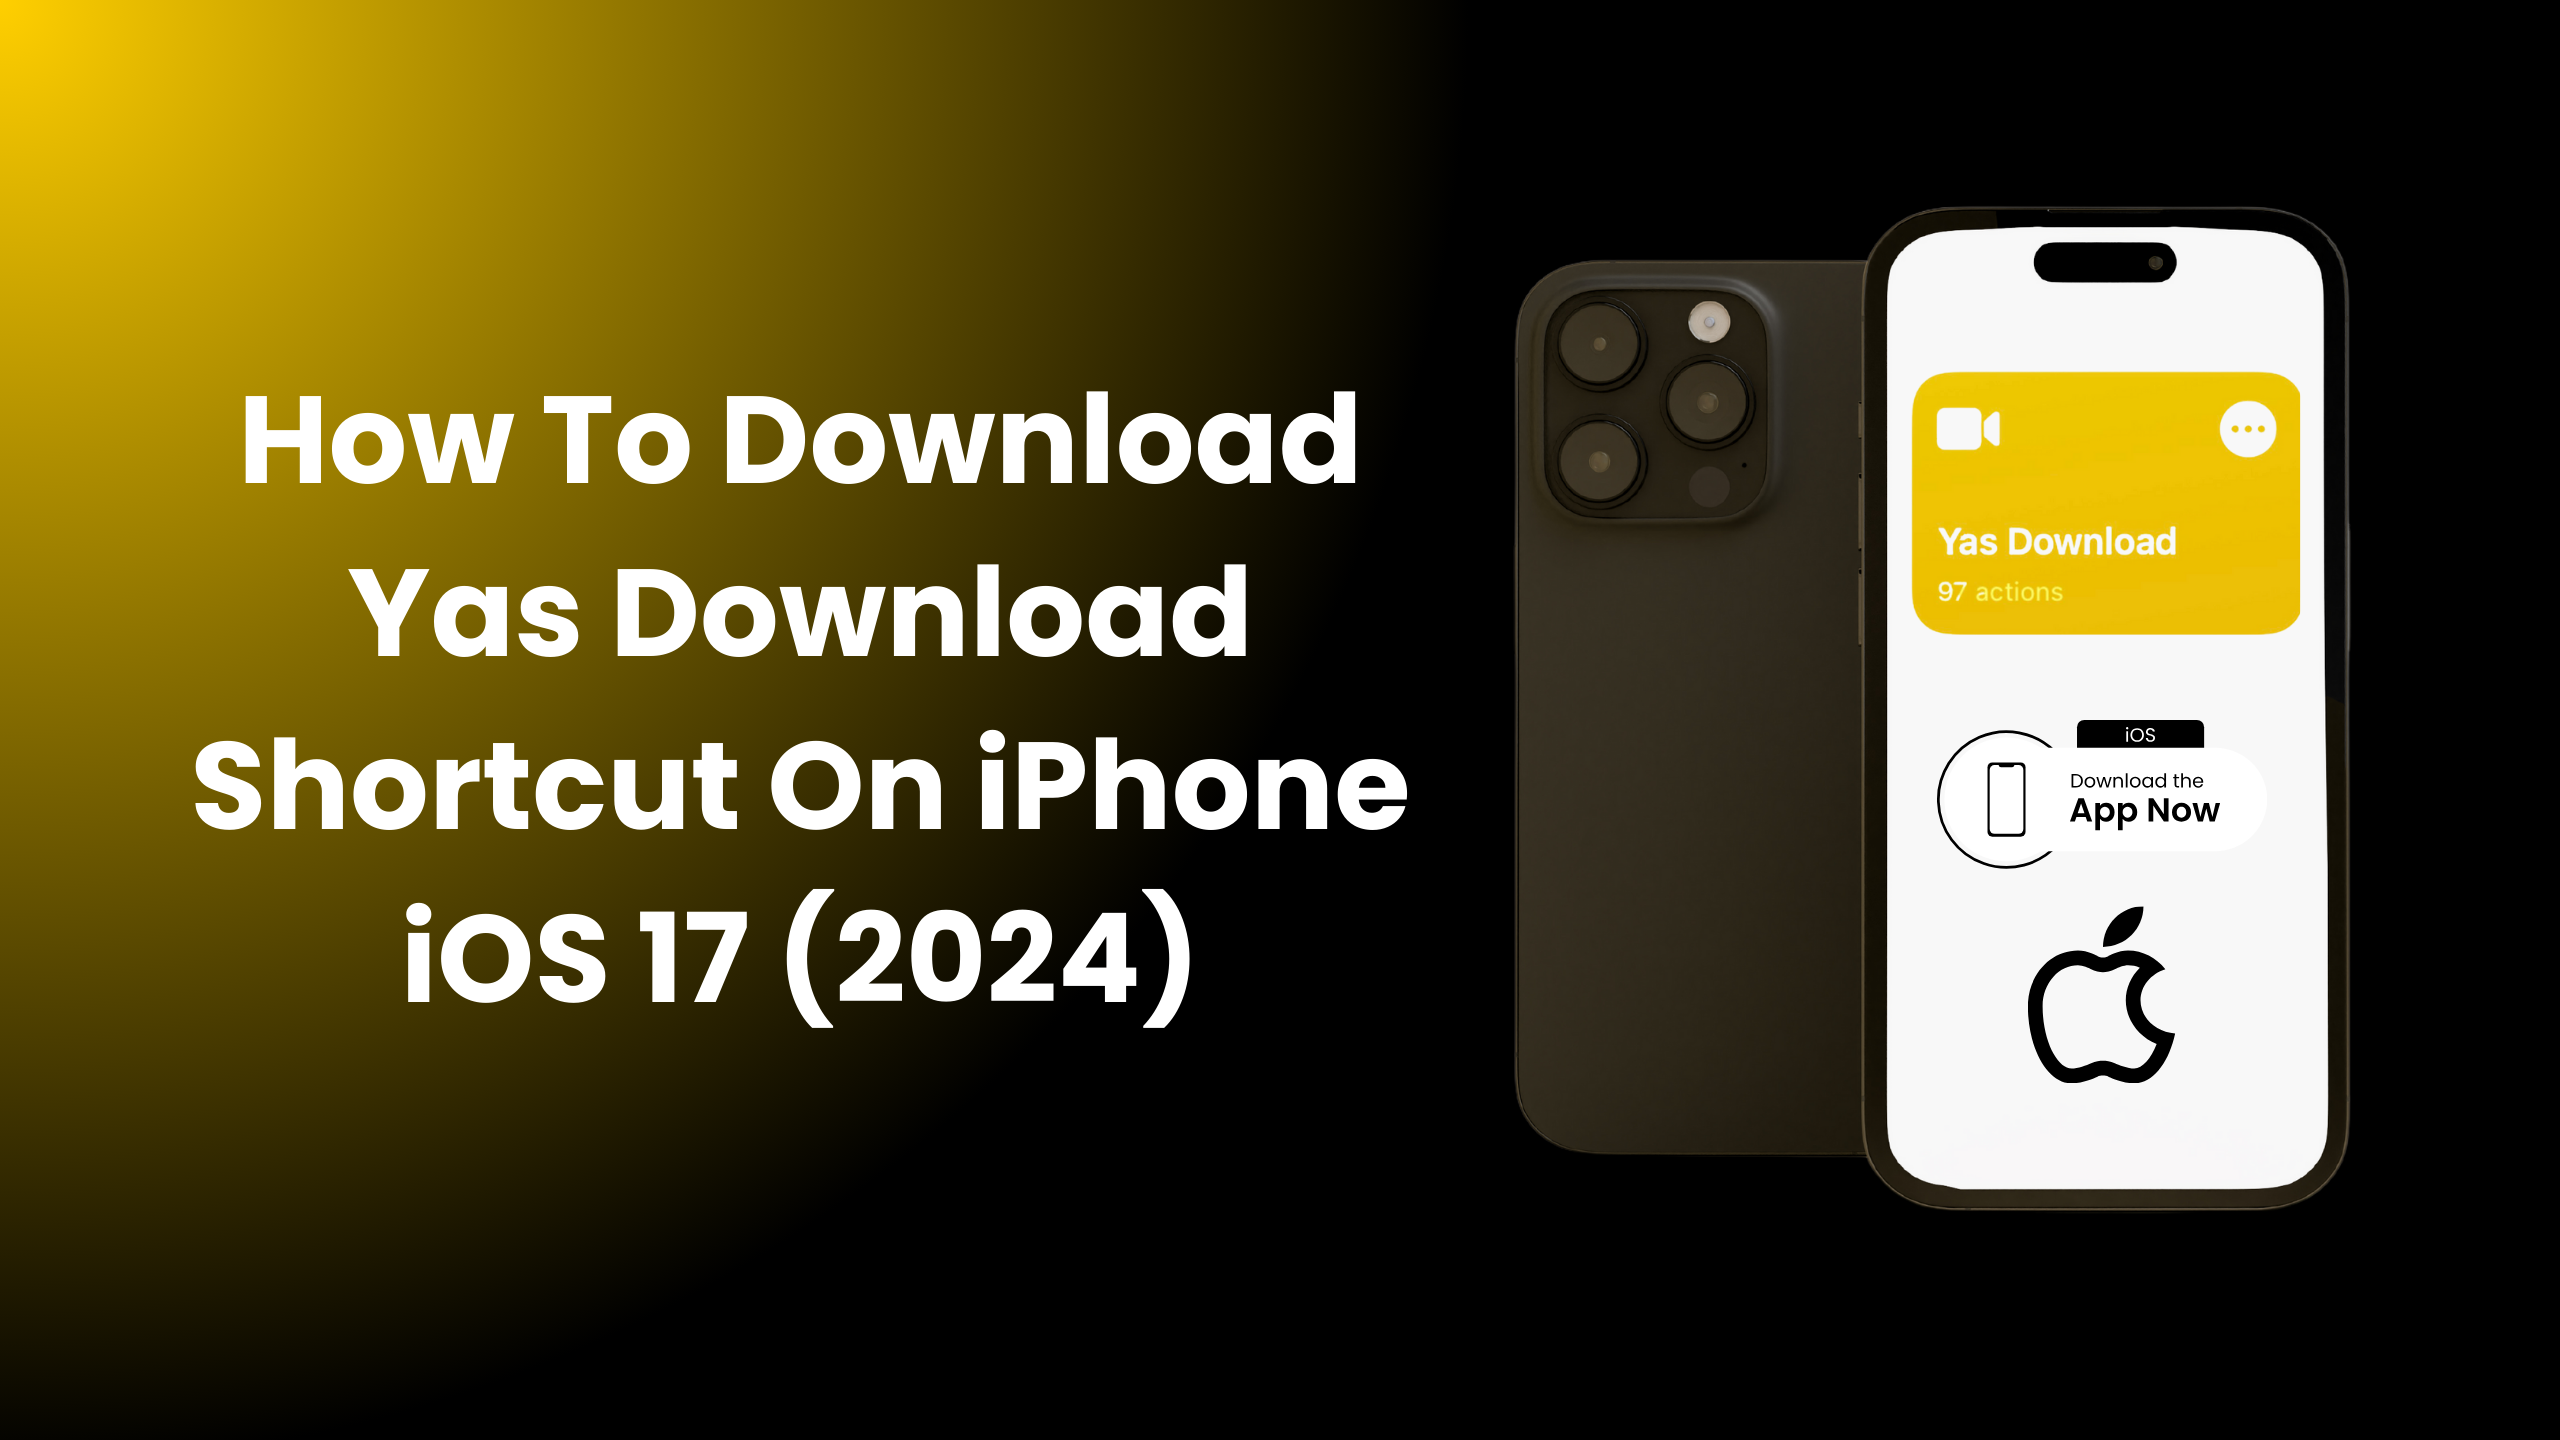 Yas Download Shortcut On iPhone